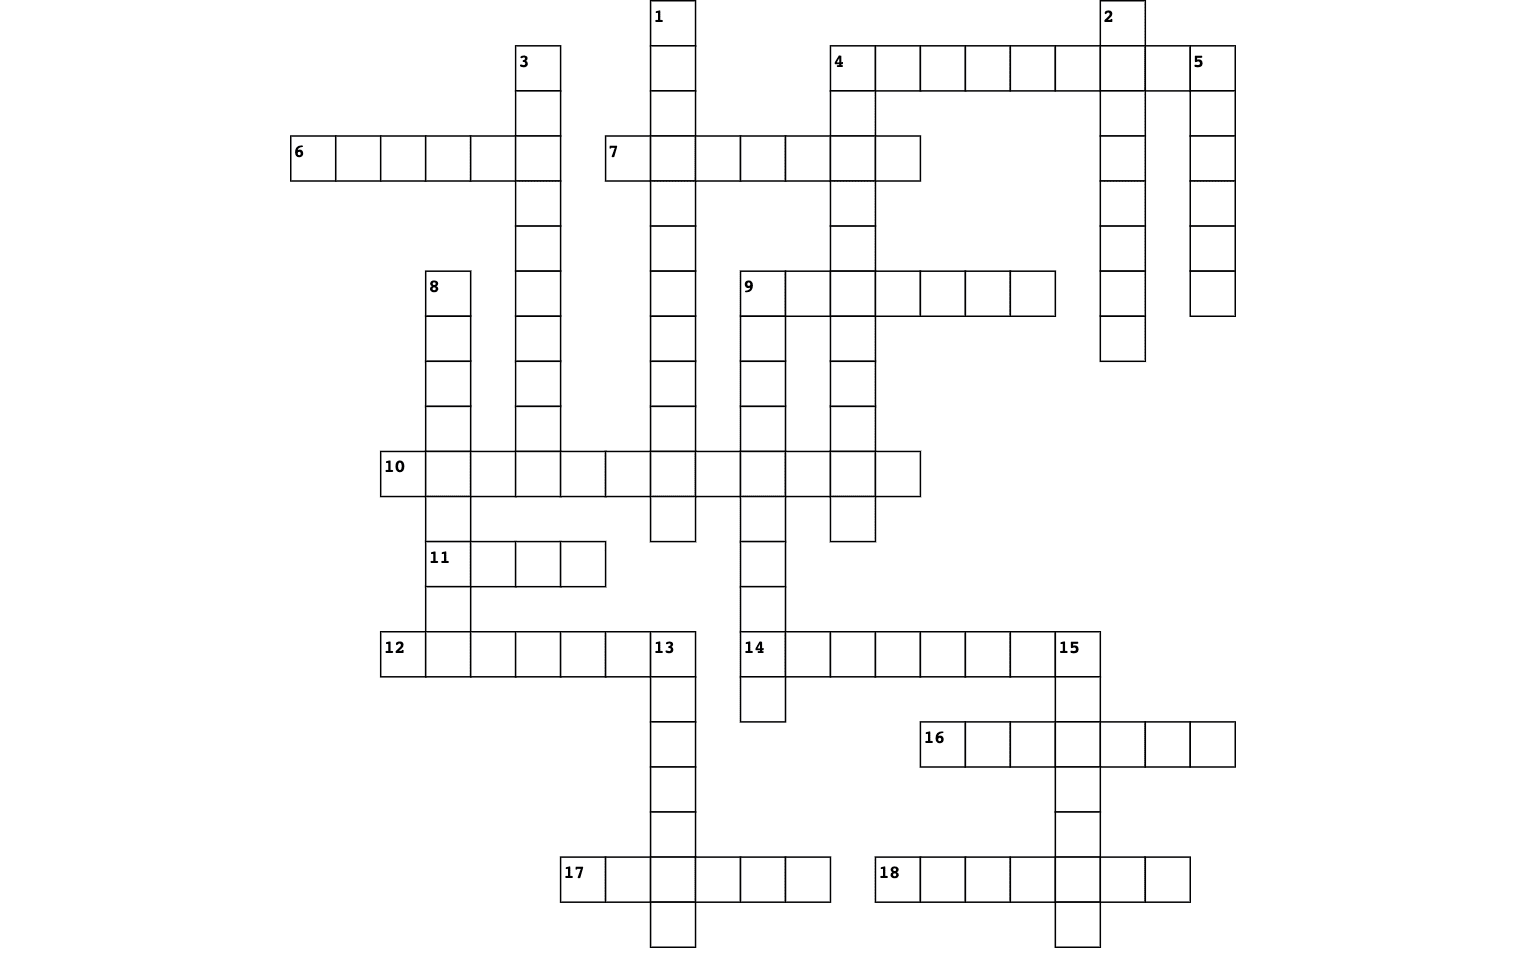 Now featuring Crosswords! This week’s theme: The Military